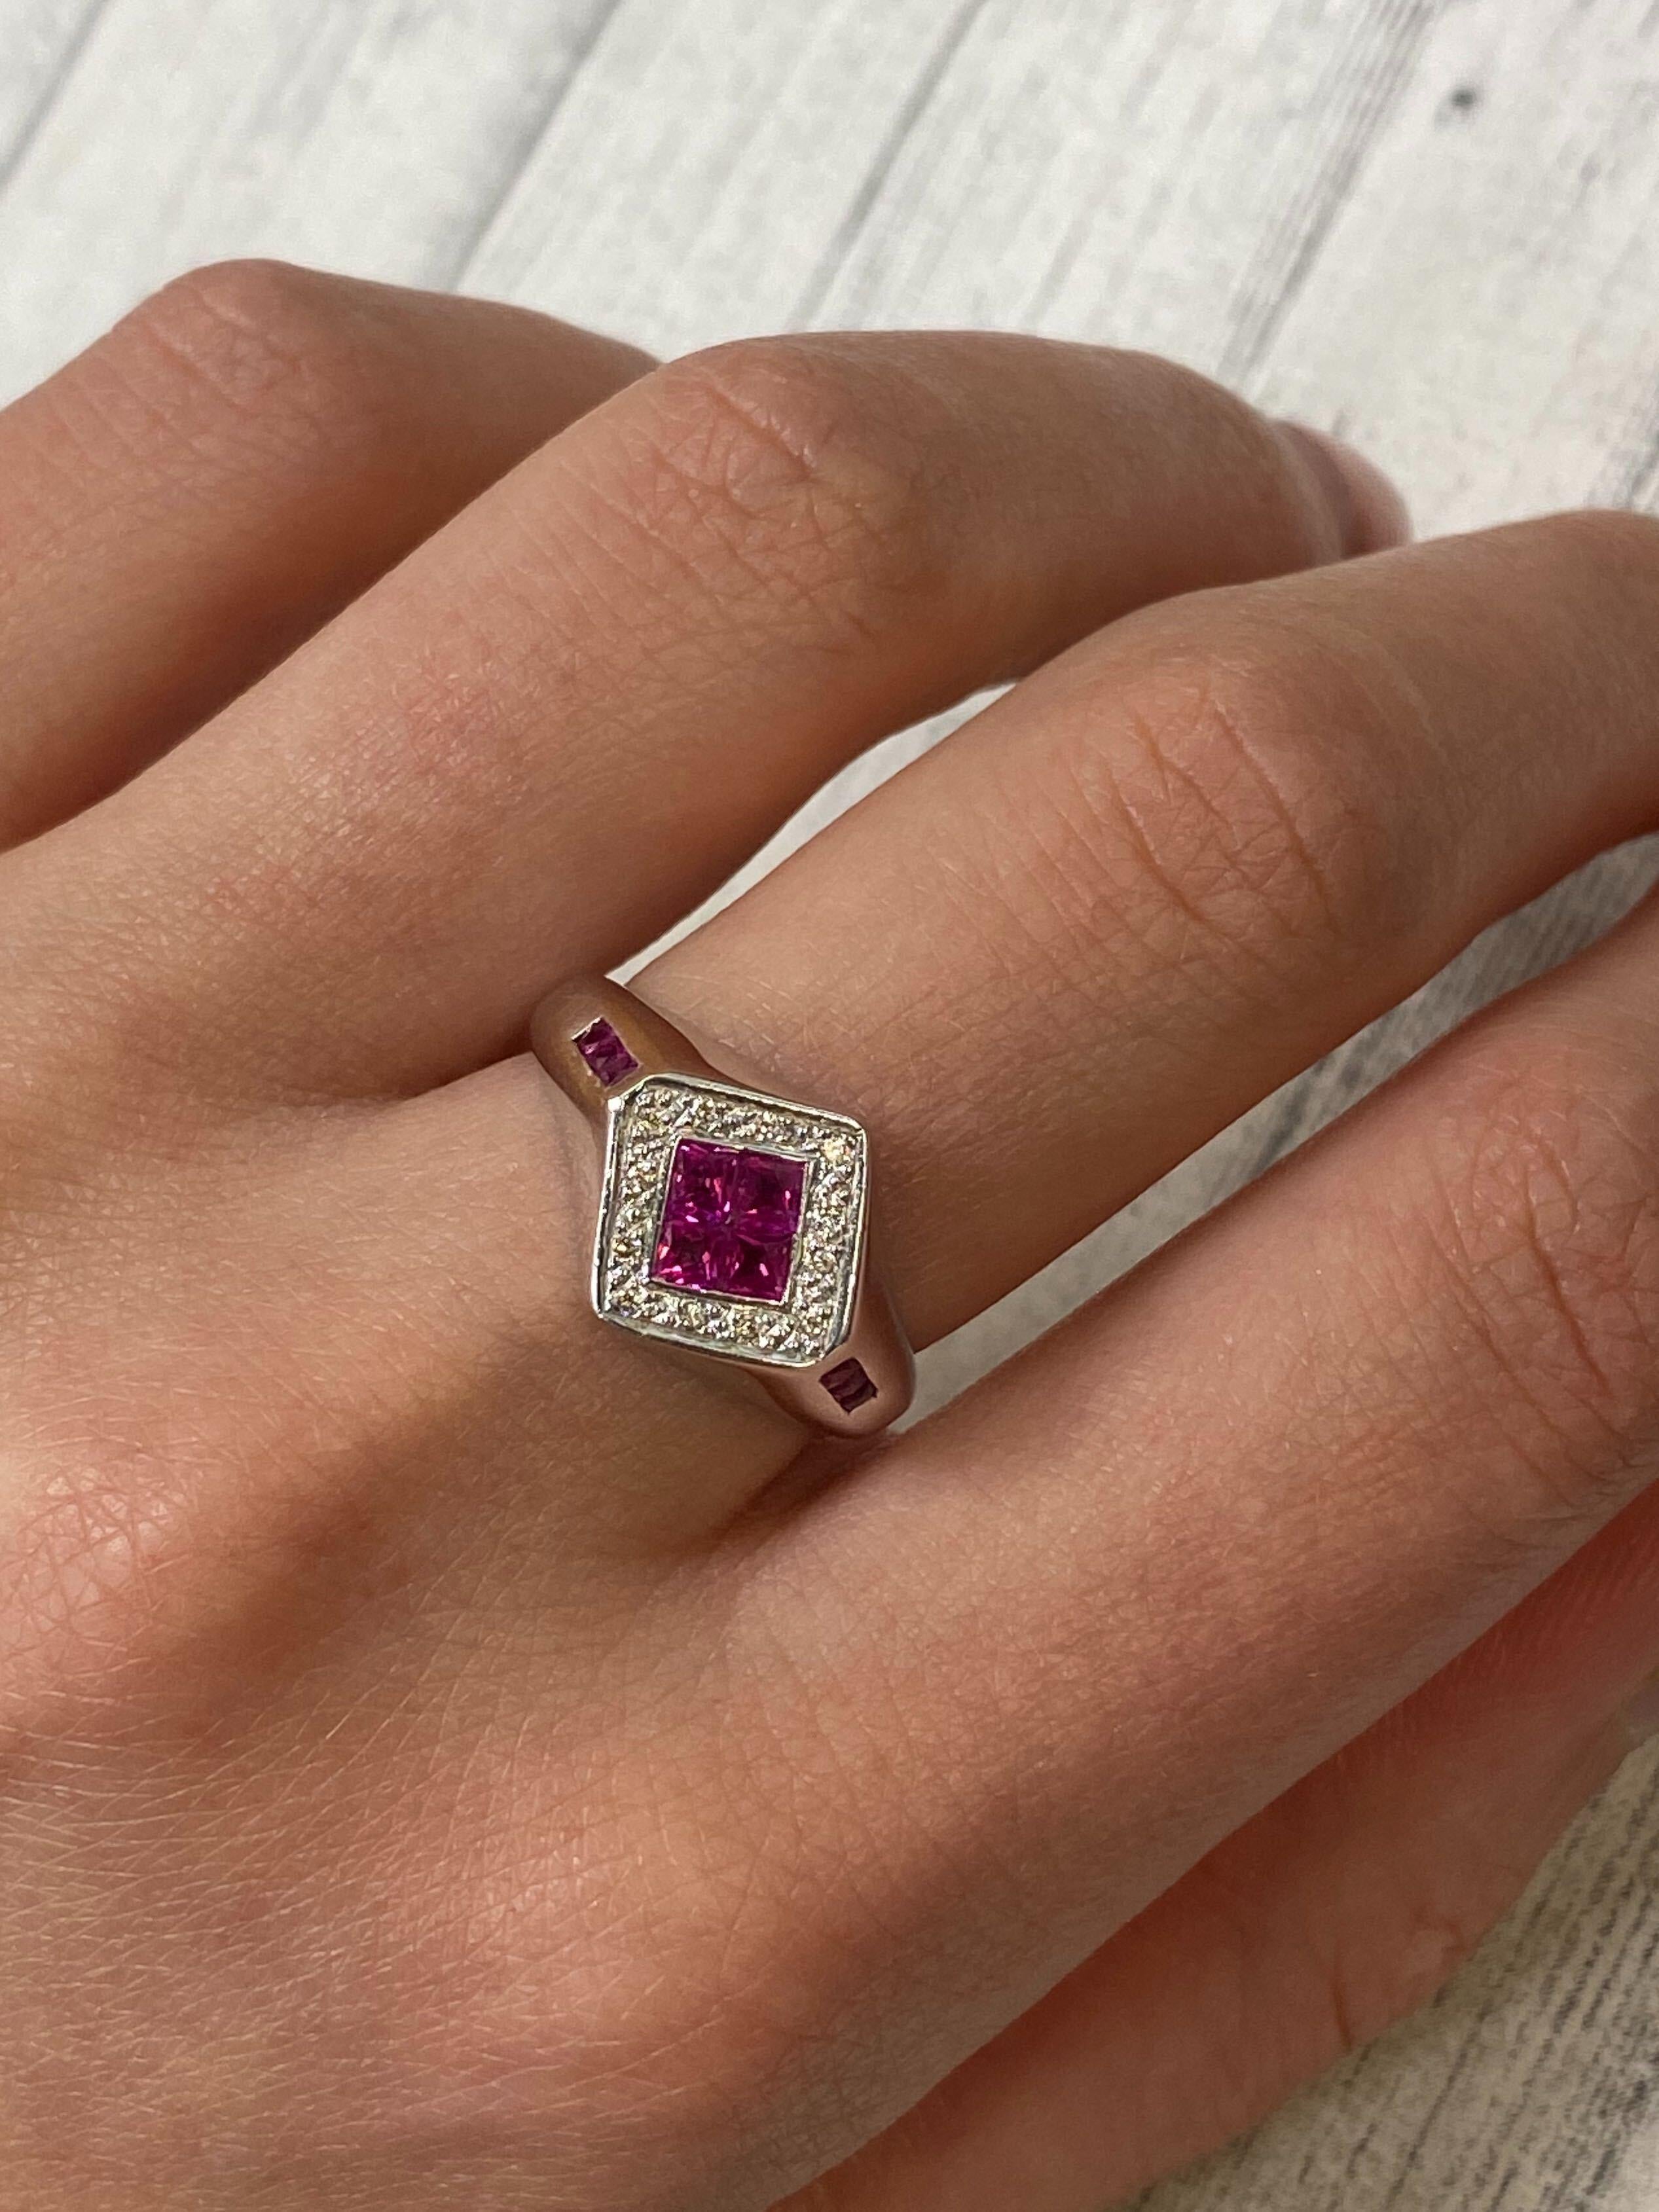 Rachel Koen Ruby with Diamonds Ladies Ring 14K White Gold In New Condition For Sale In New York, NY